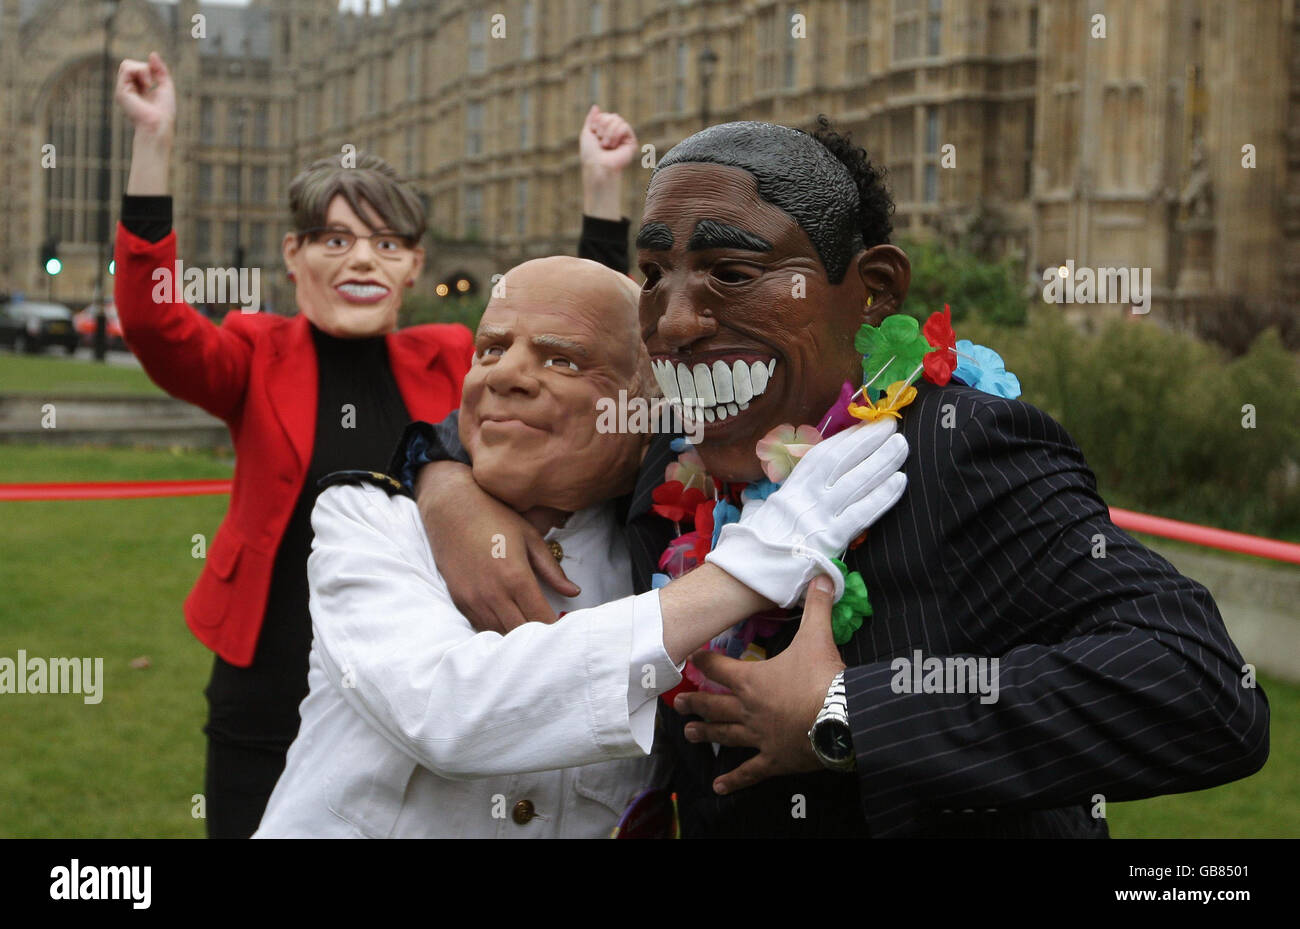 Actors dressed as US Presidential candidates Barack Obama and John McCain, and Vice-Presidential candidate Sarah Palin take part in a wrestling match staged by betting firm Ladbrokes, on College Green, Westminster, London. Stock Photo